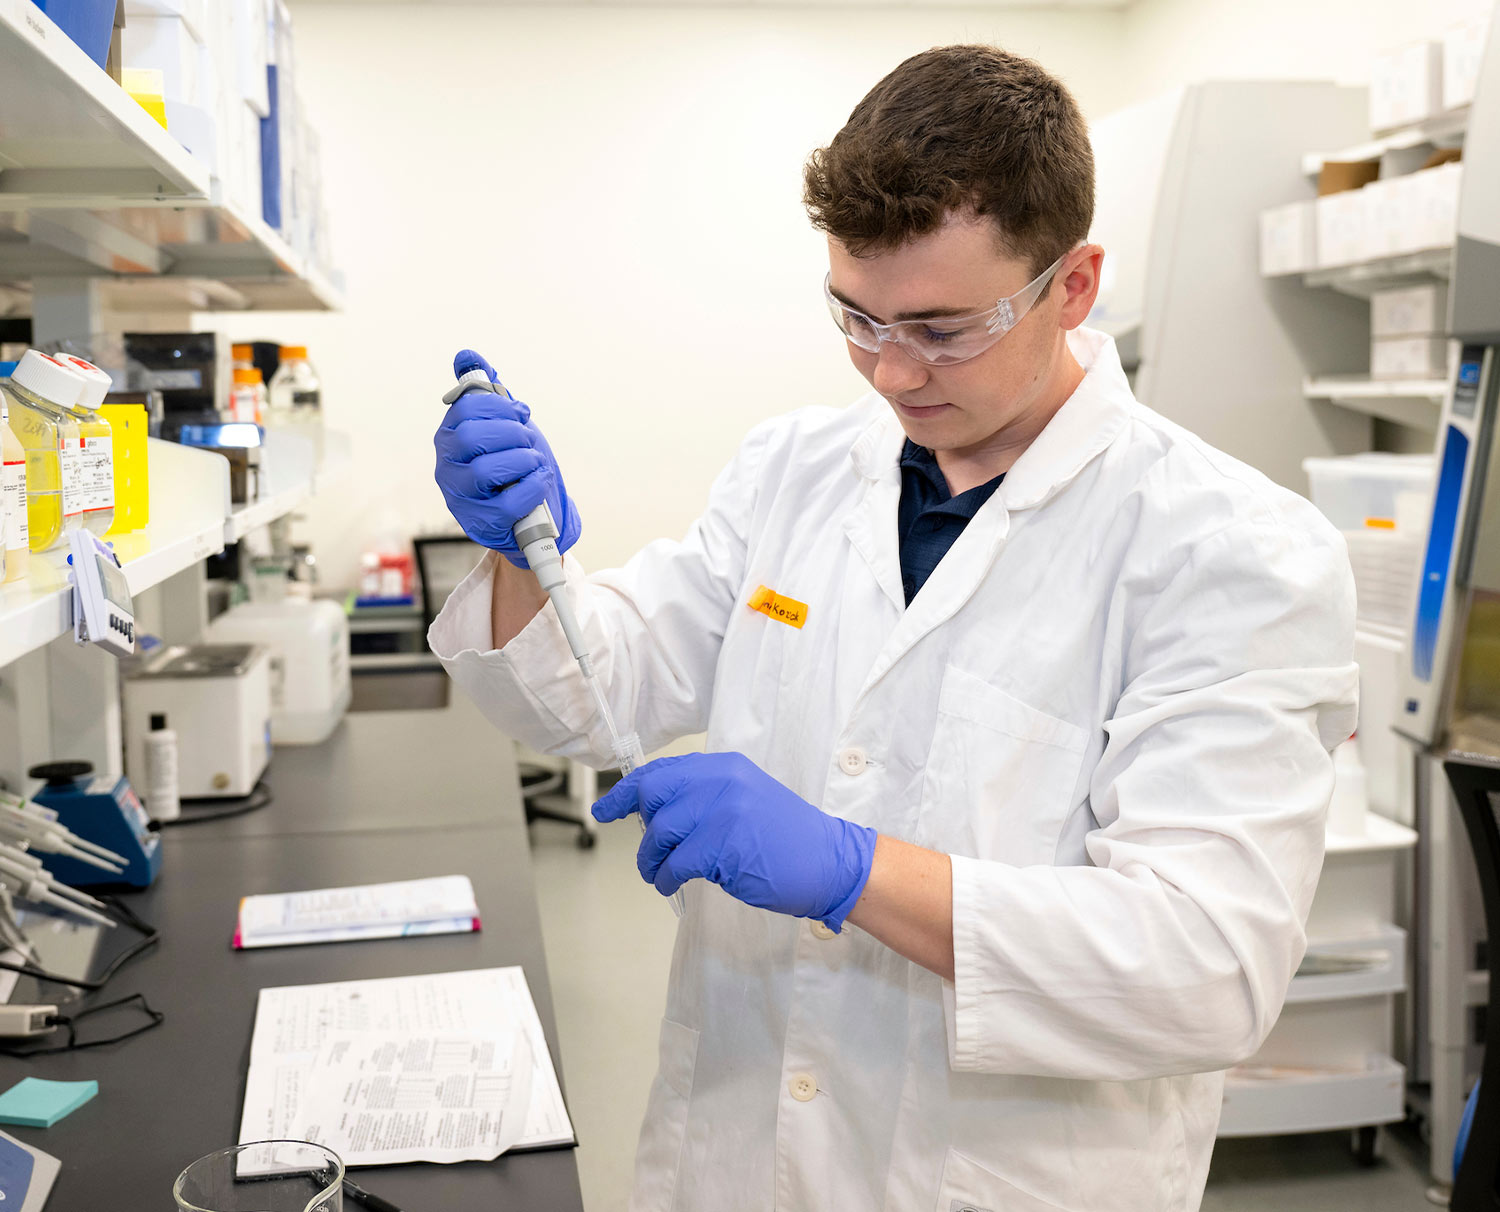 Connor Kozick stands in a lab wearing a white coat and goggles while using a pipette